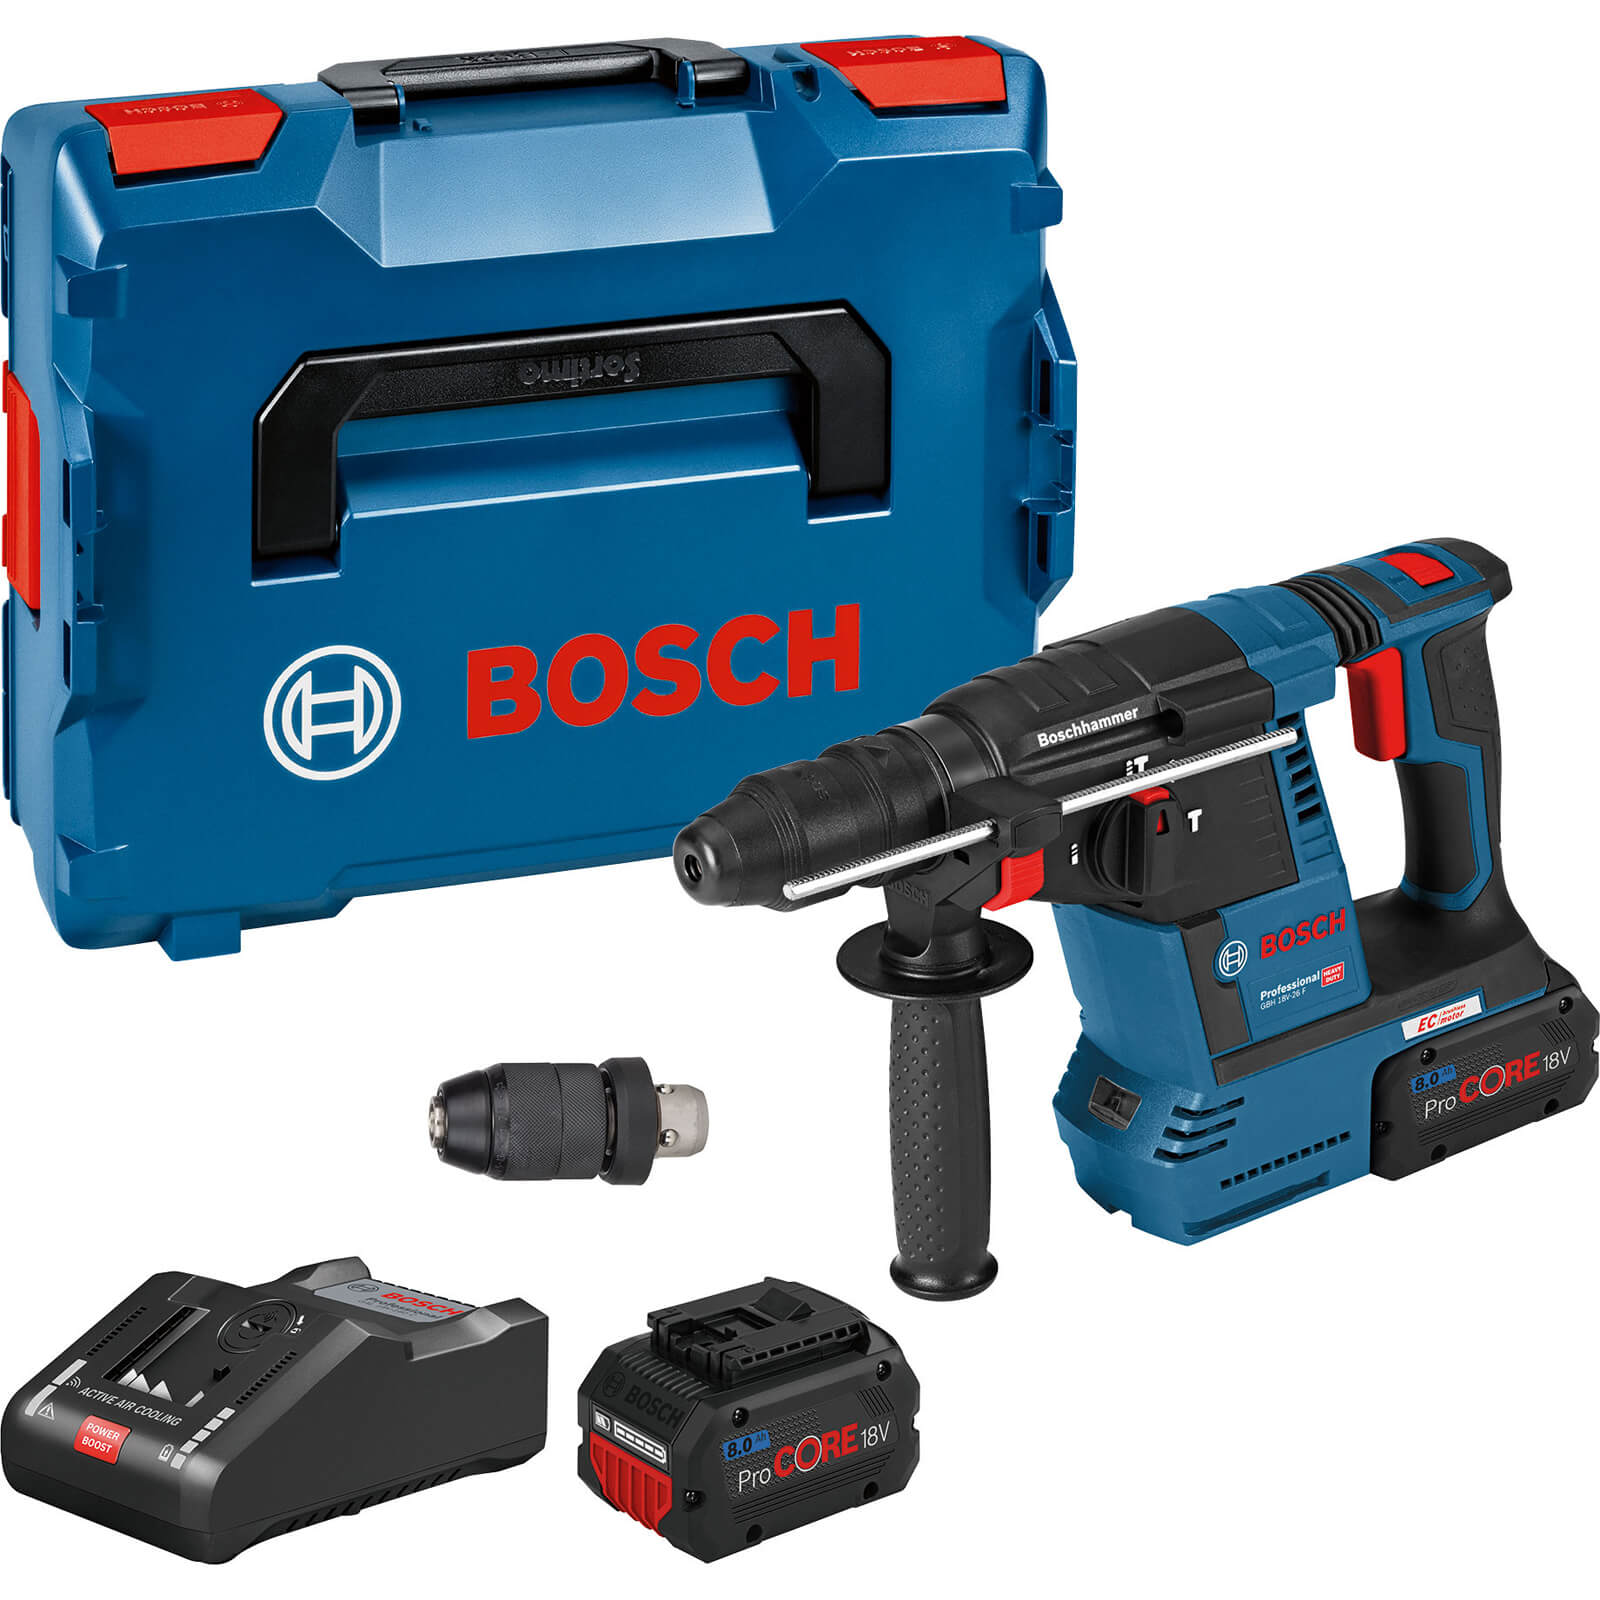 Image of Bosch GBH 18 V-26 F 18v Cordless SDS Drill 2 x 8ah Li-ion ProCore Charger Case